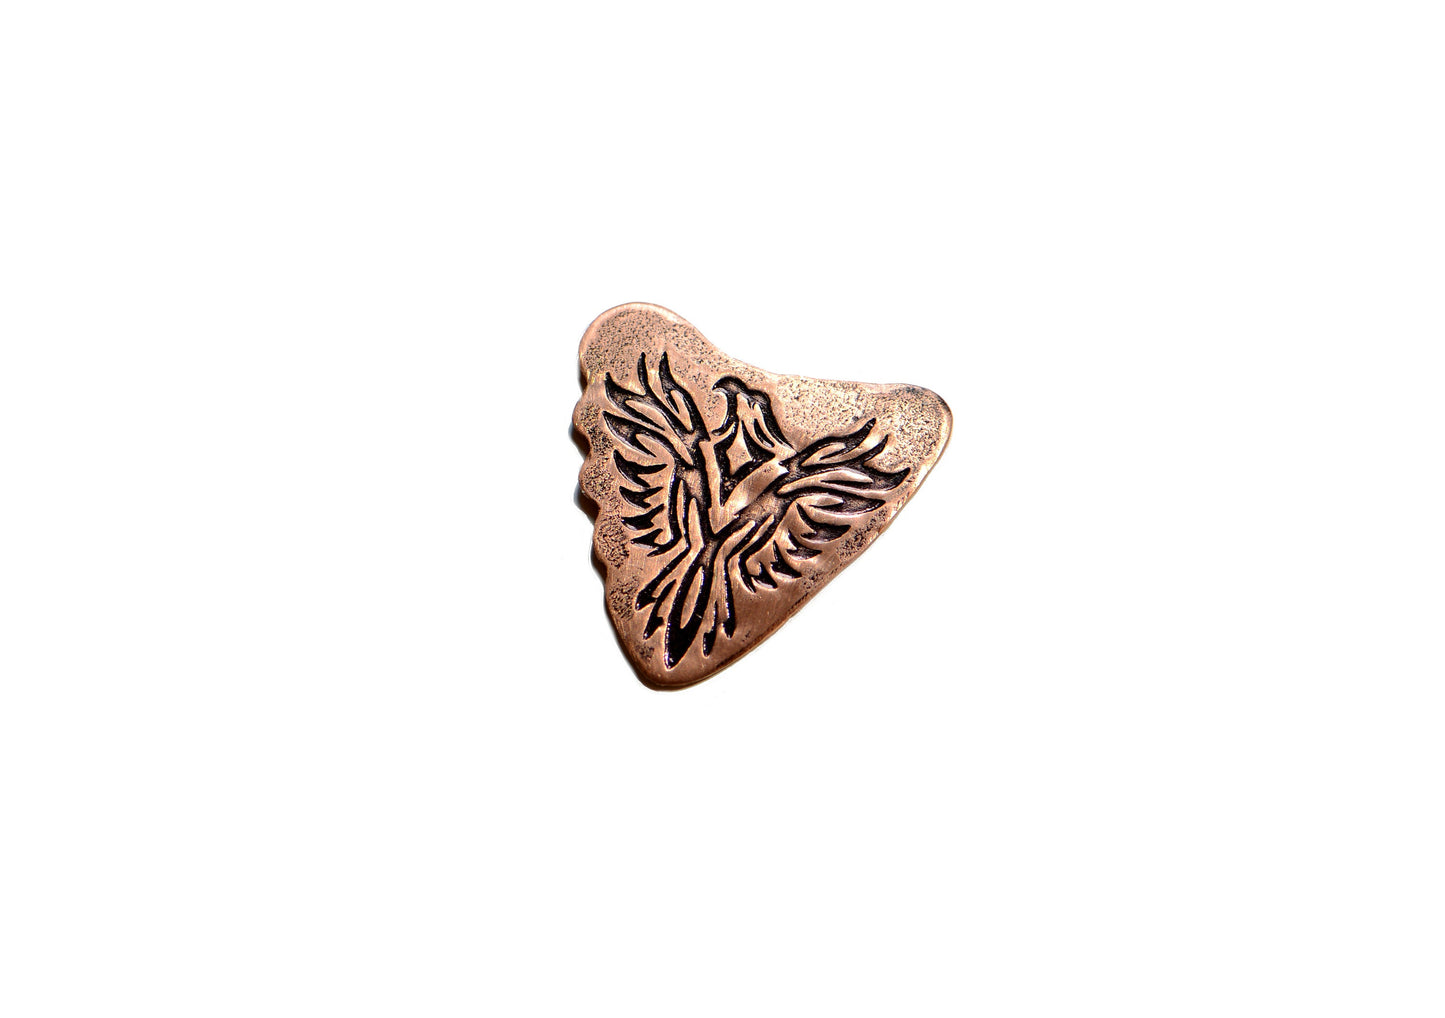 Shark tooth copper guitar pick with a Phoenix